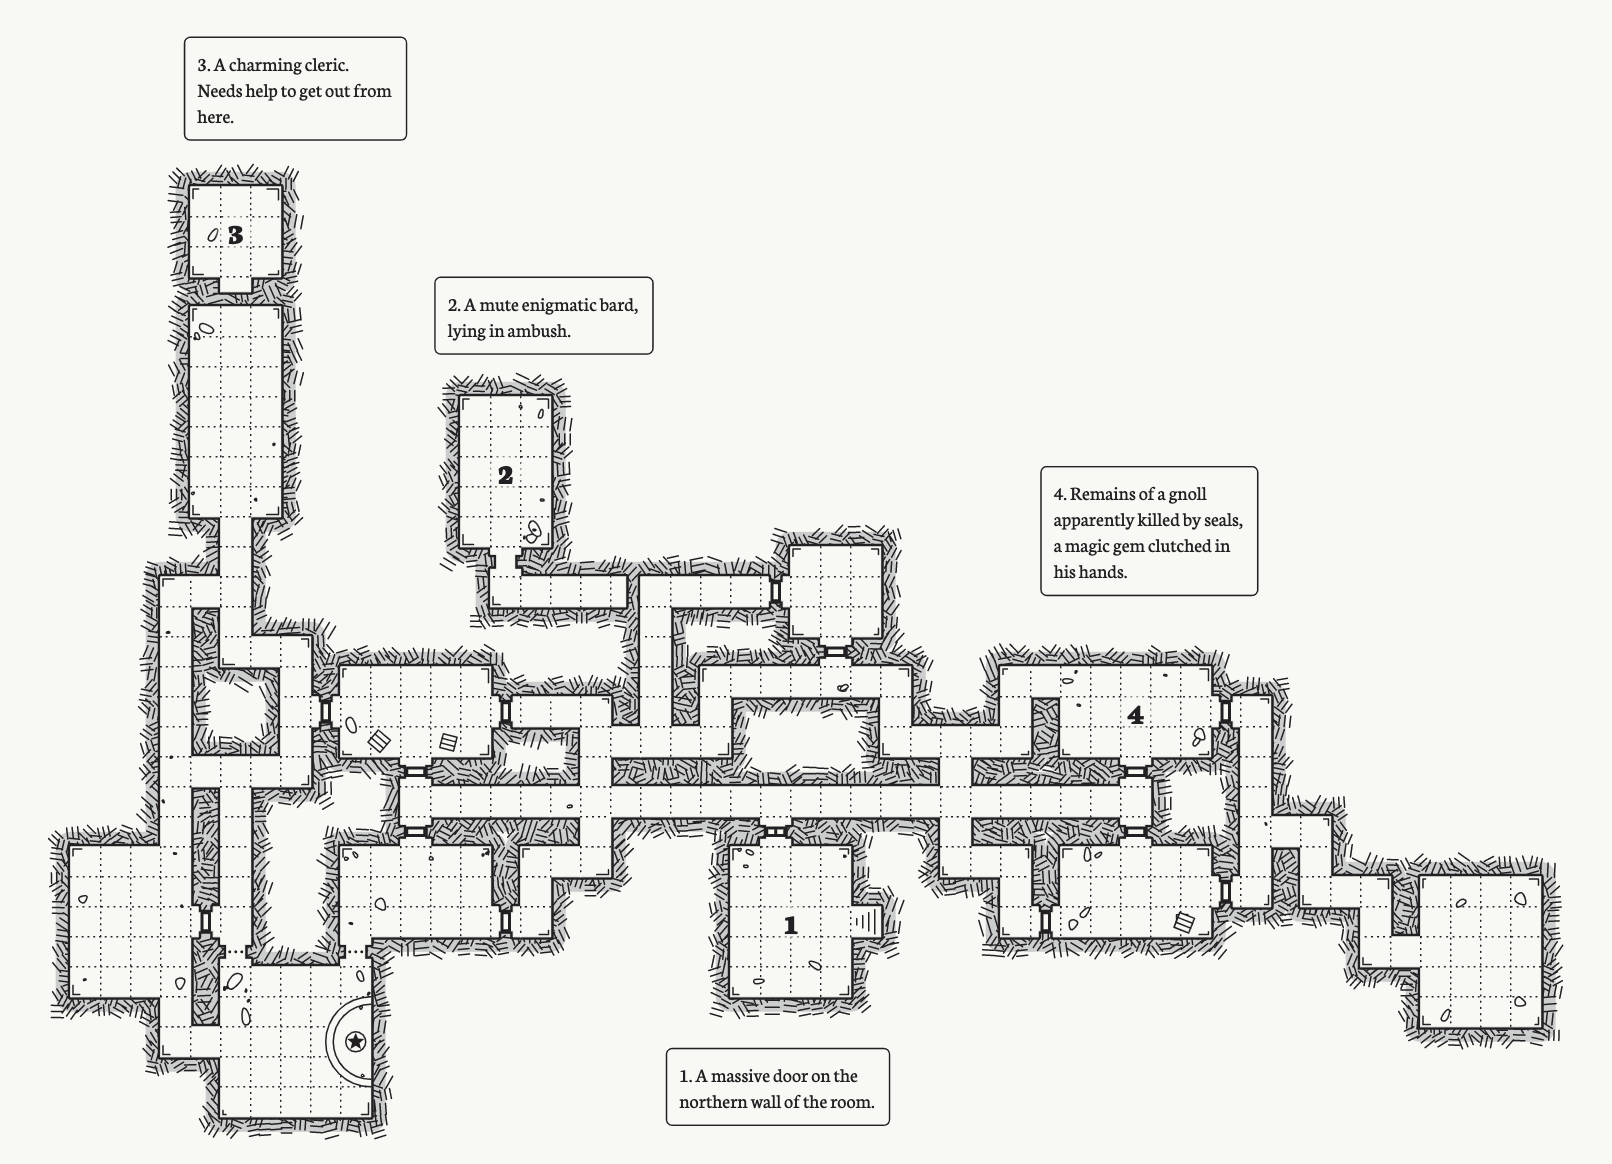 Dungeon map with annotations